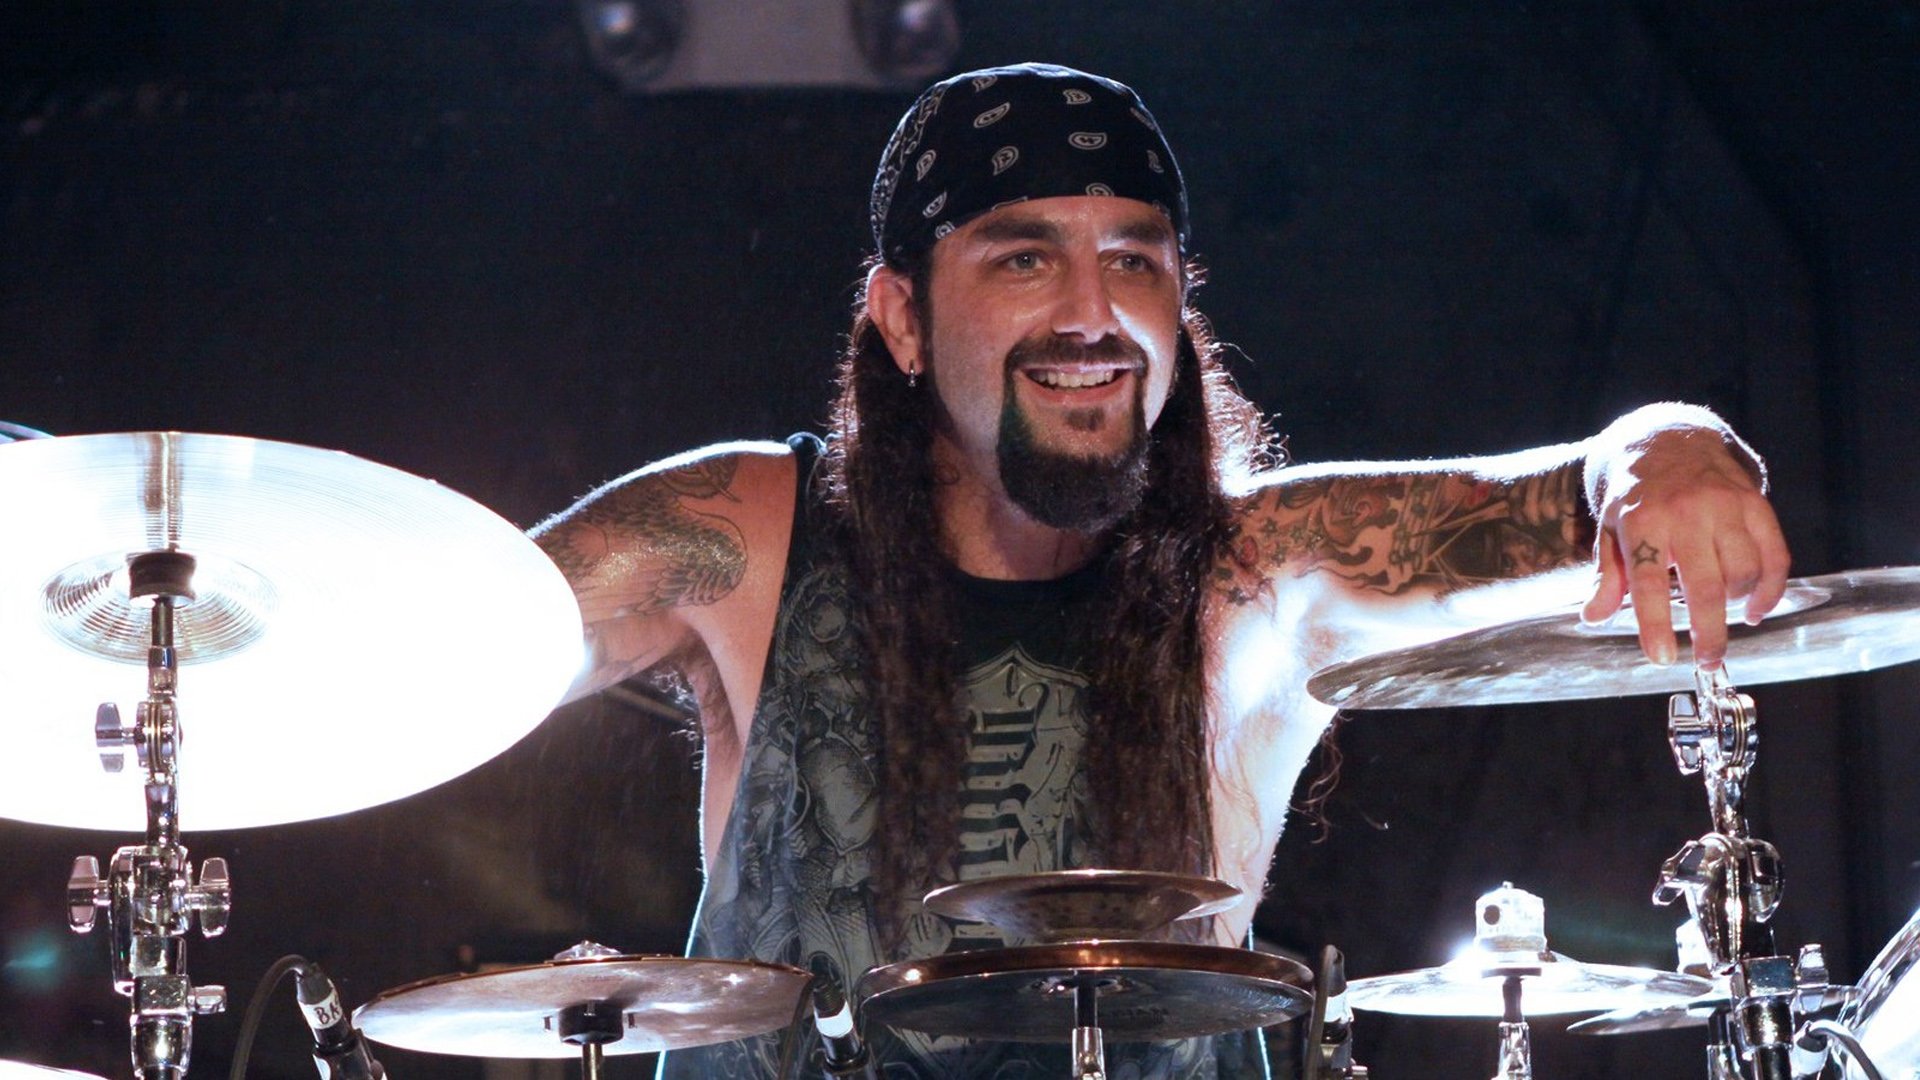 Dream Theater s drummer, Mike Portnoy turned 50 today! Happy birthday 